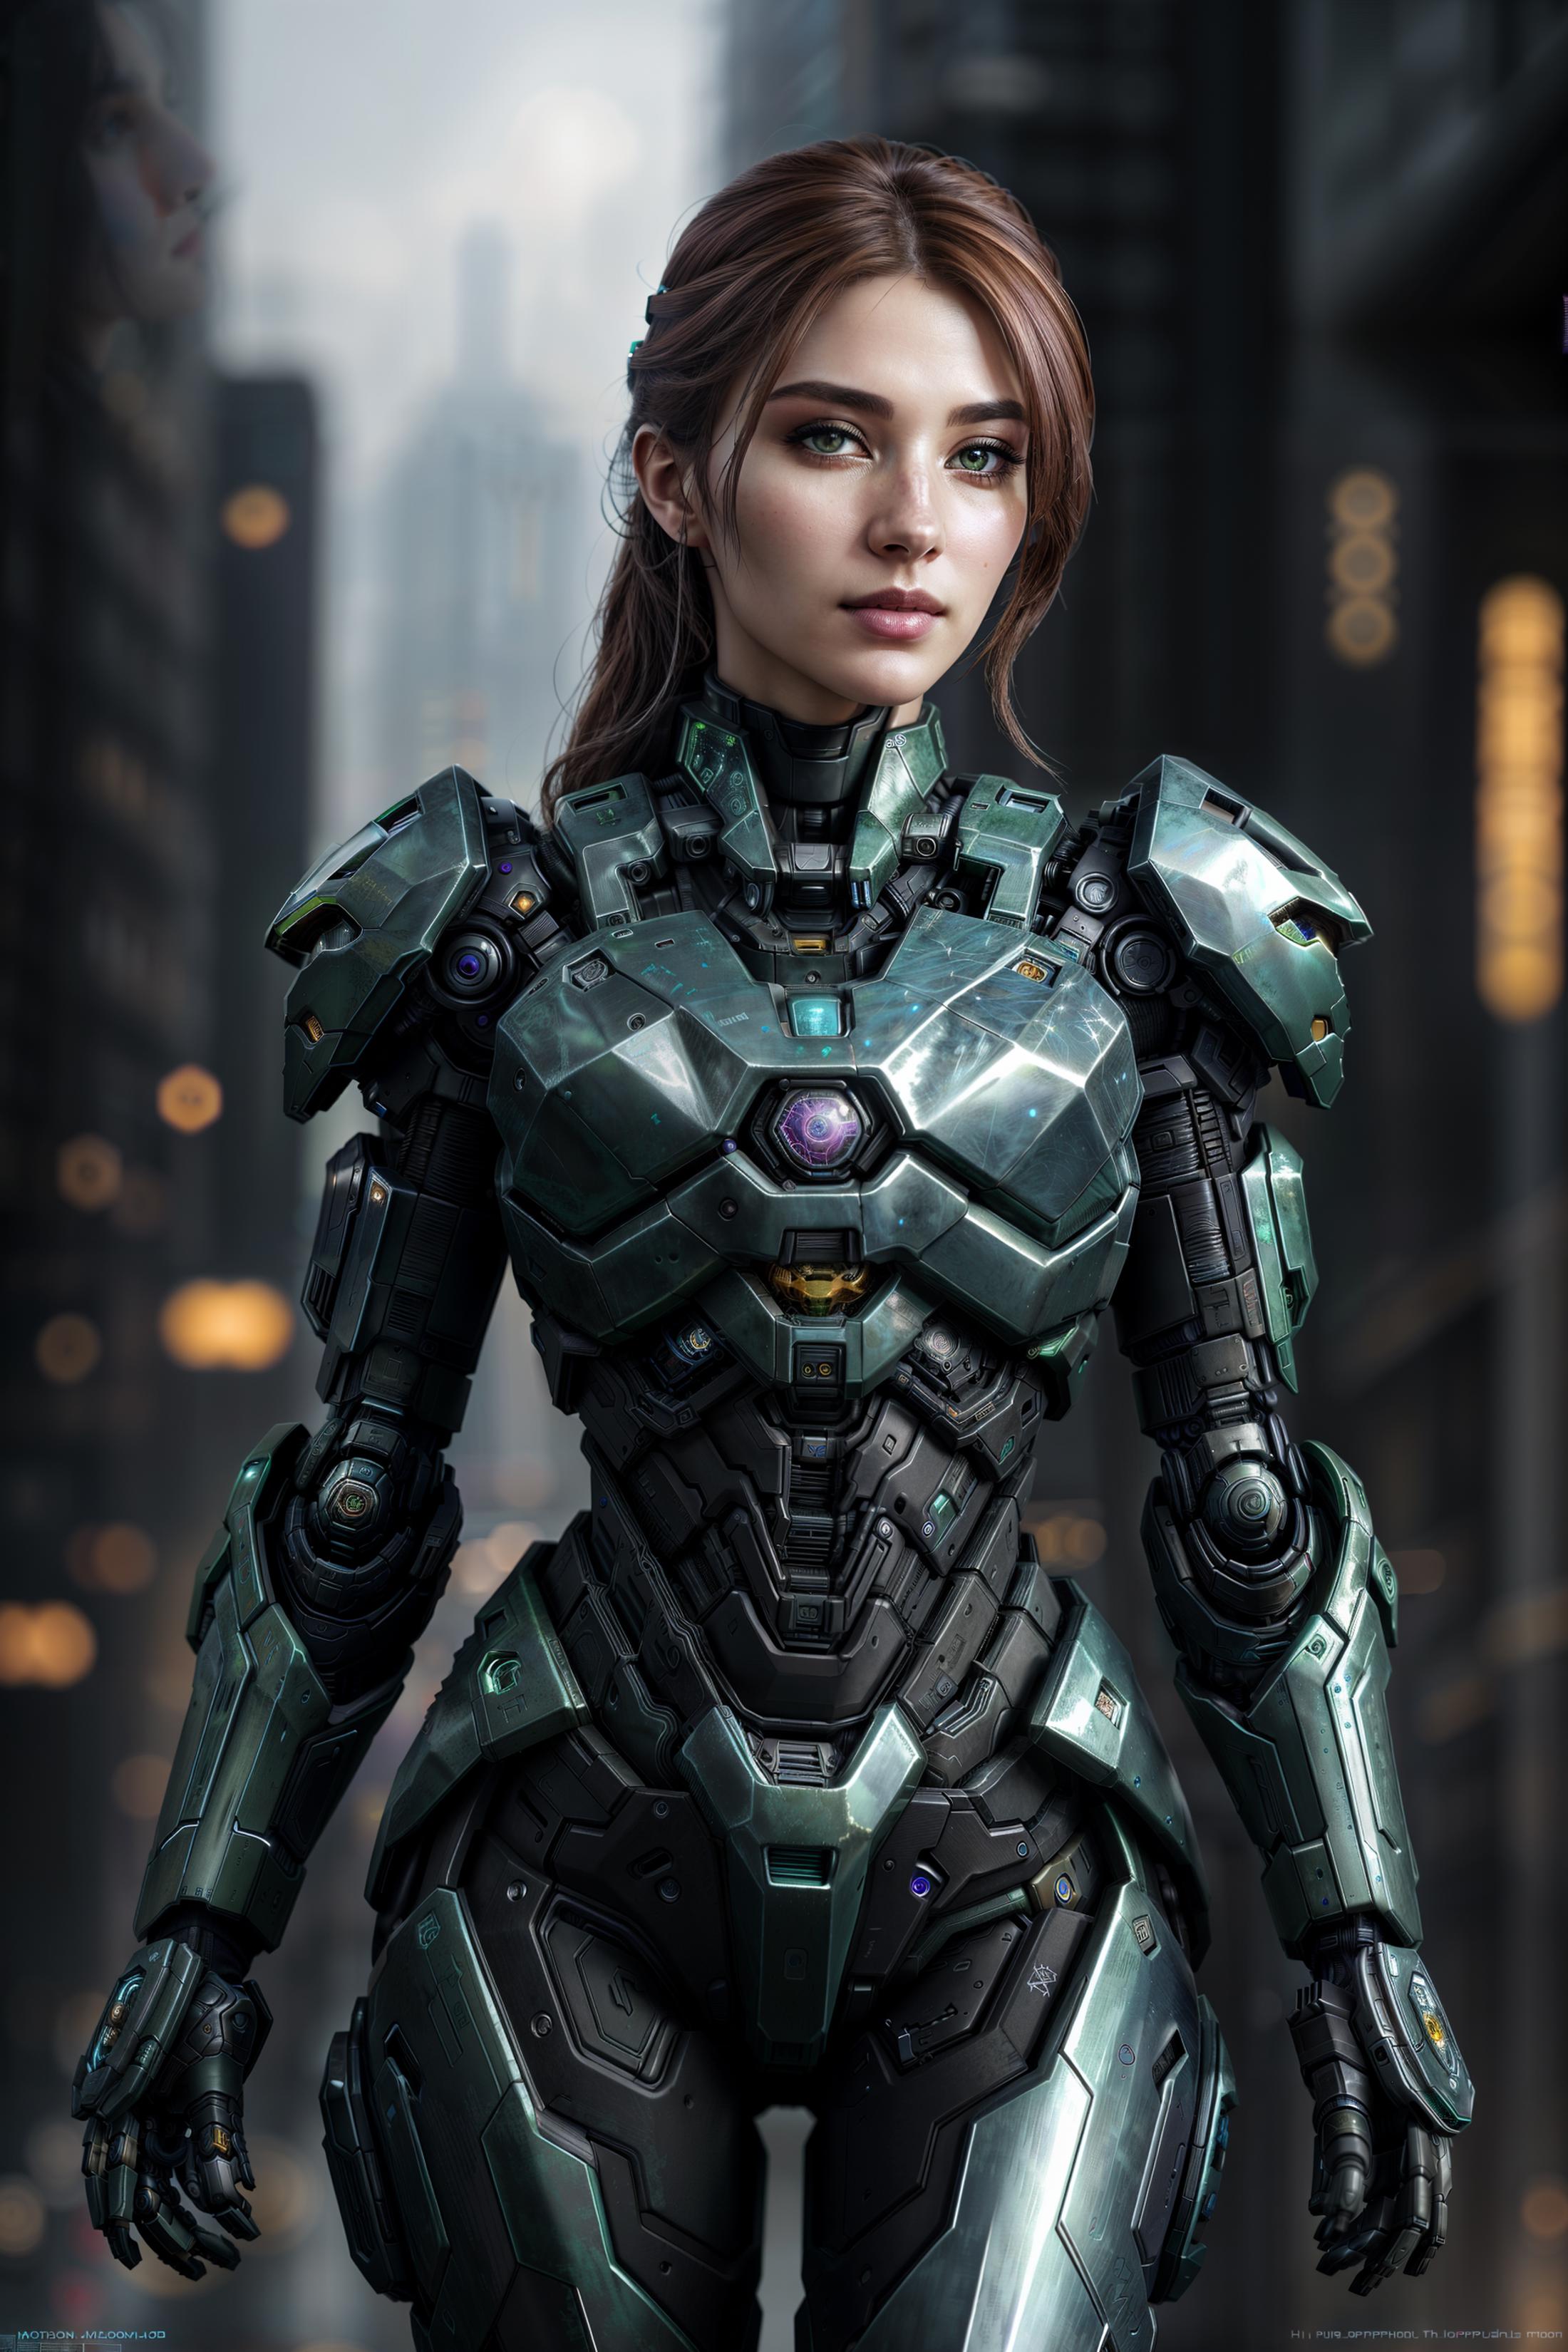 A woman wearing a green and black futuristic cyber suit.